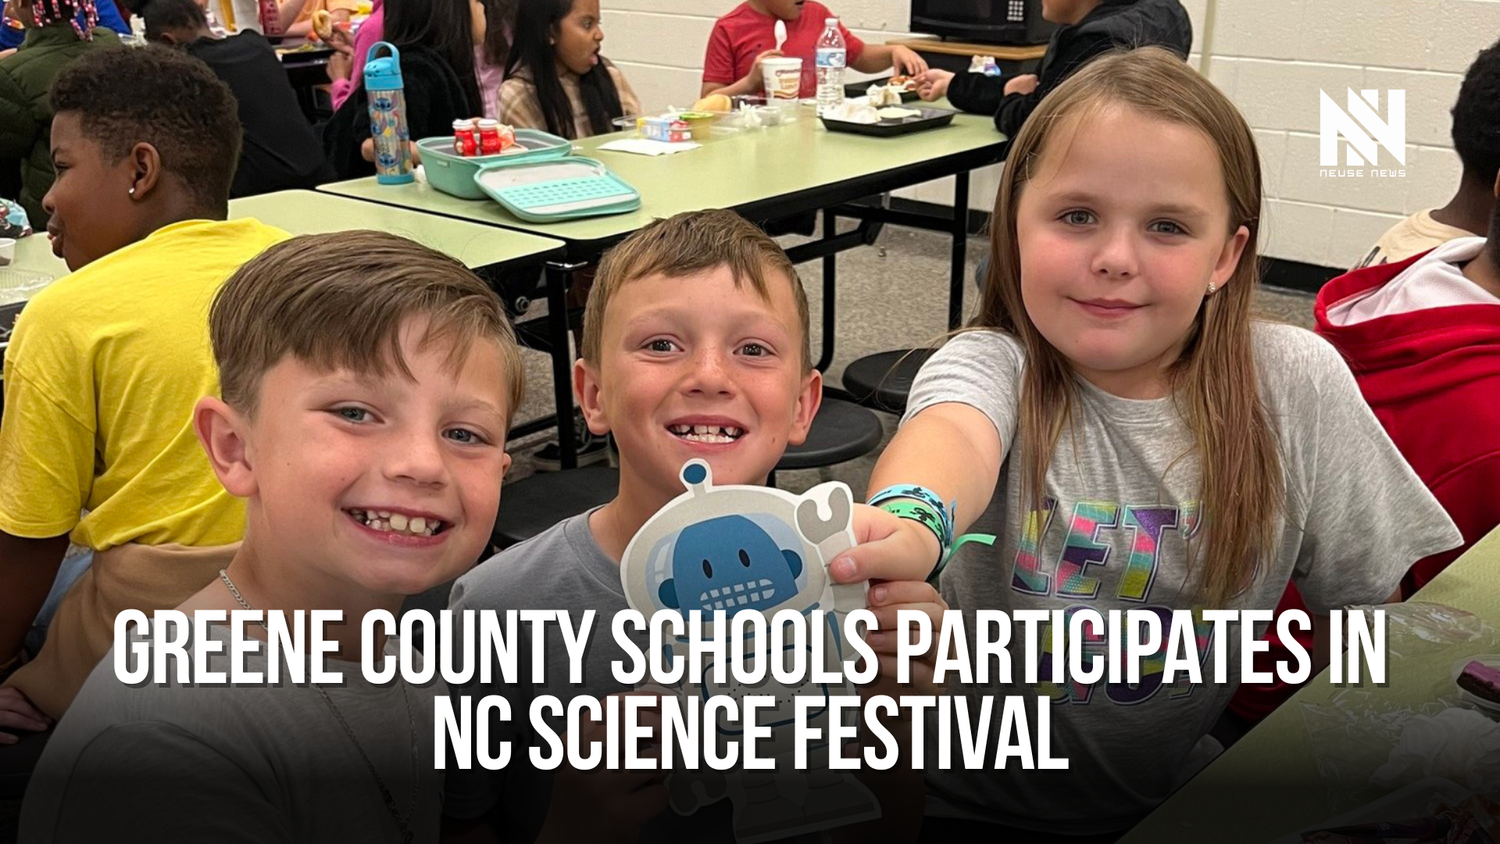 Science Meets Fun: A Memorable Night for Families in Greene County Middle School